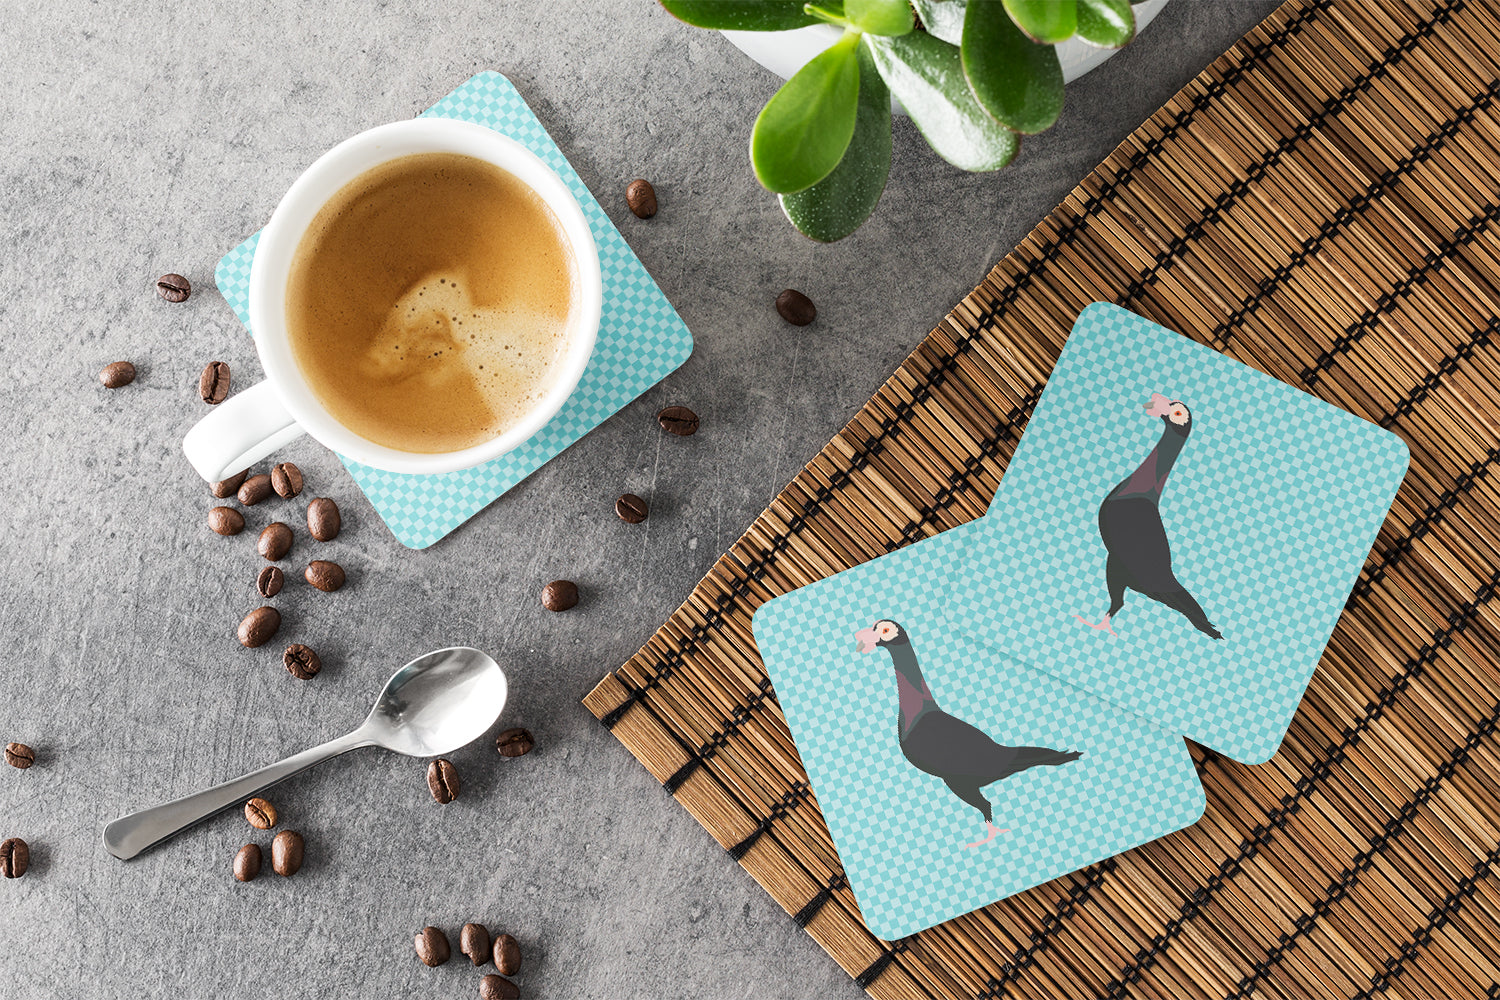 English Carrier Pigeon Blue Check Foam Coaster Set of 4 BB8119FC - the-store.com